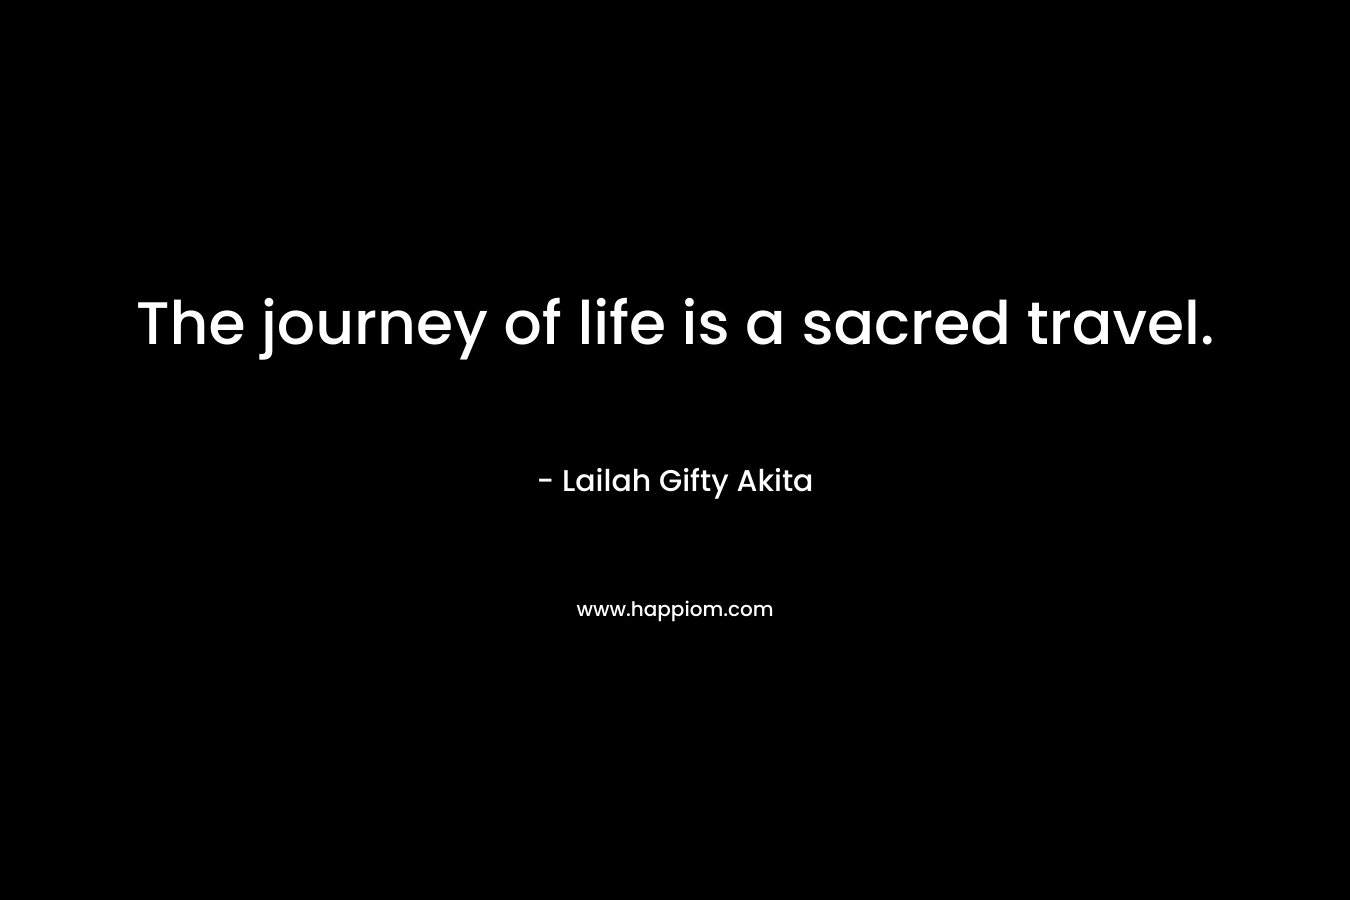 The journey of life is a sacred travel.